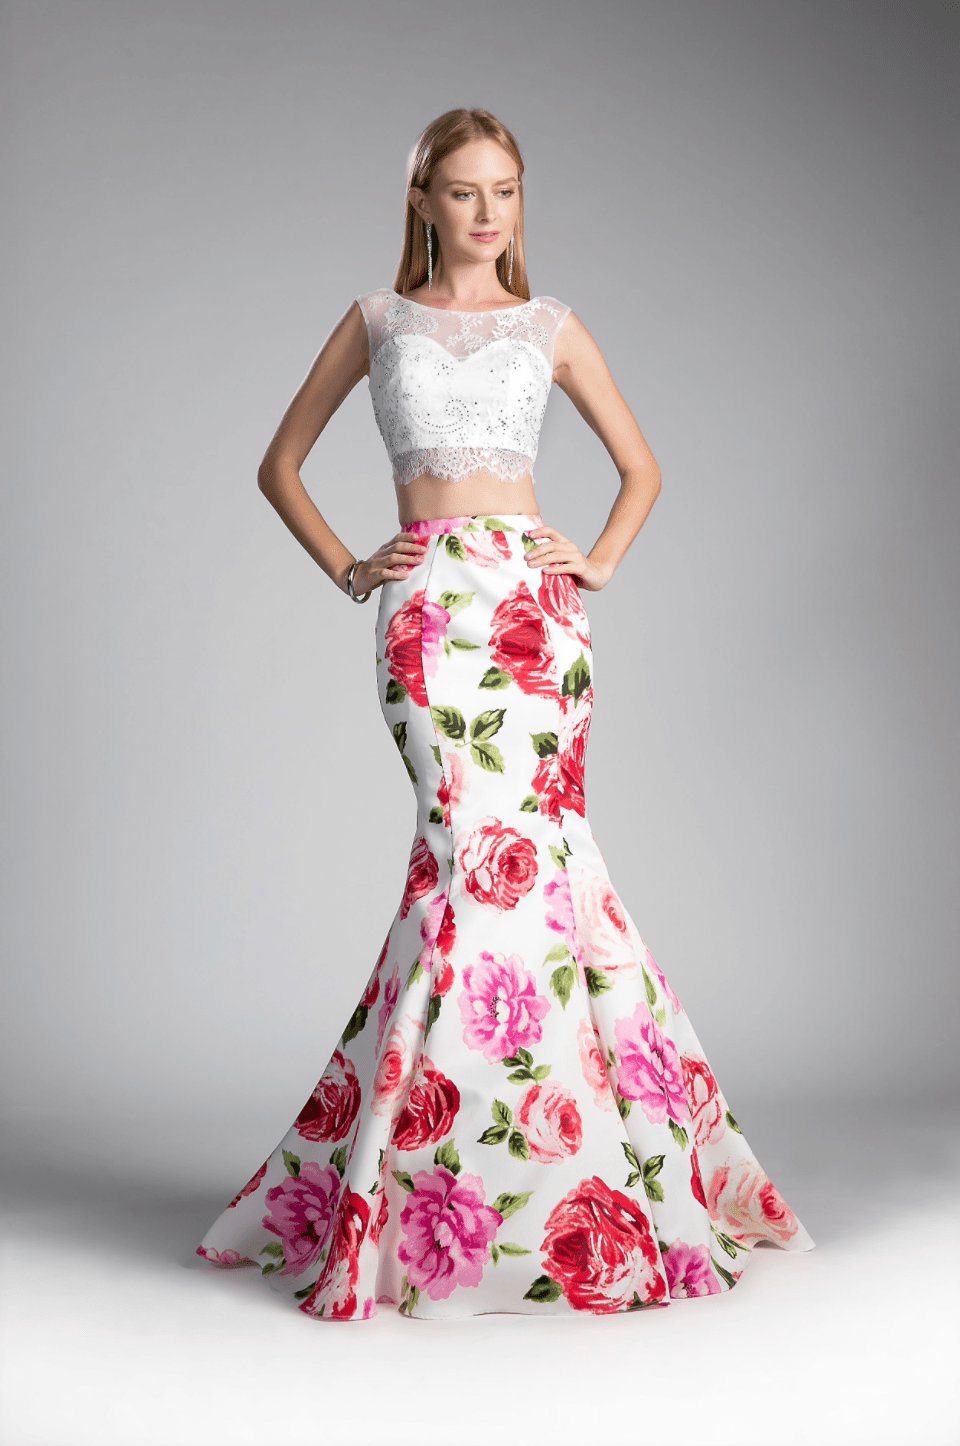 White Satin Floral Mermaid Dress by Ladivine - NORMA REED